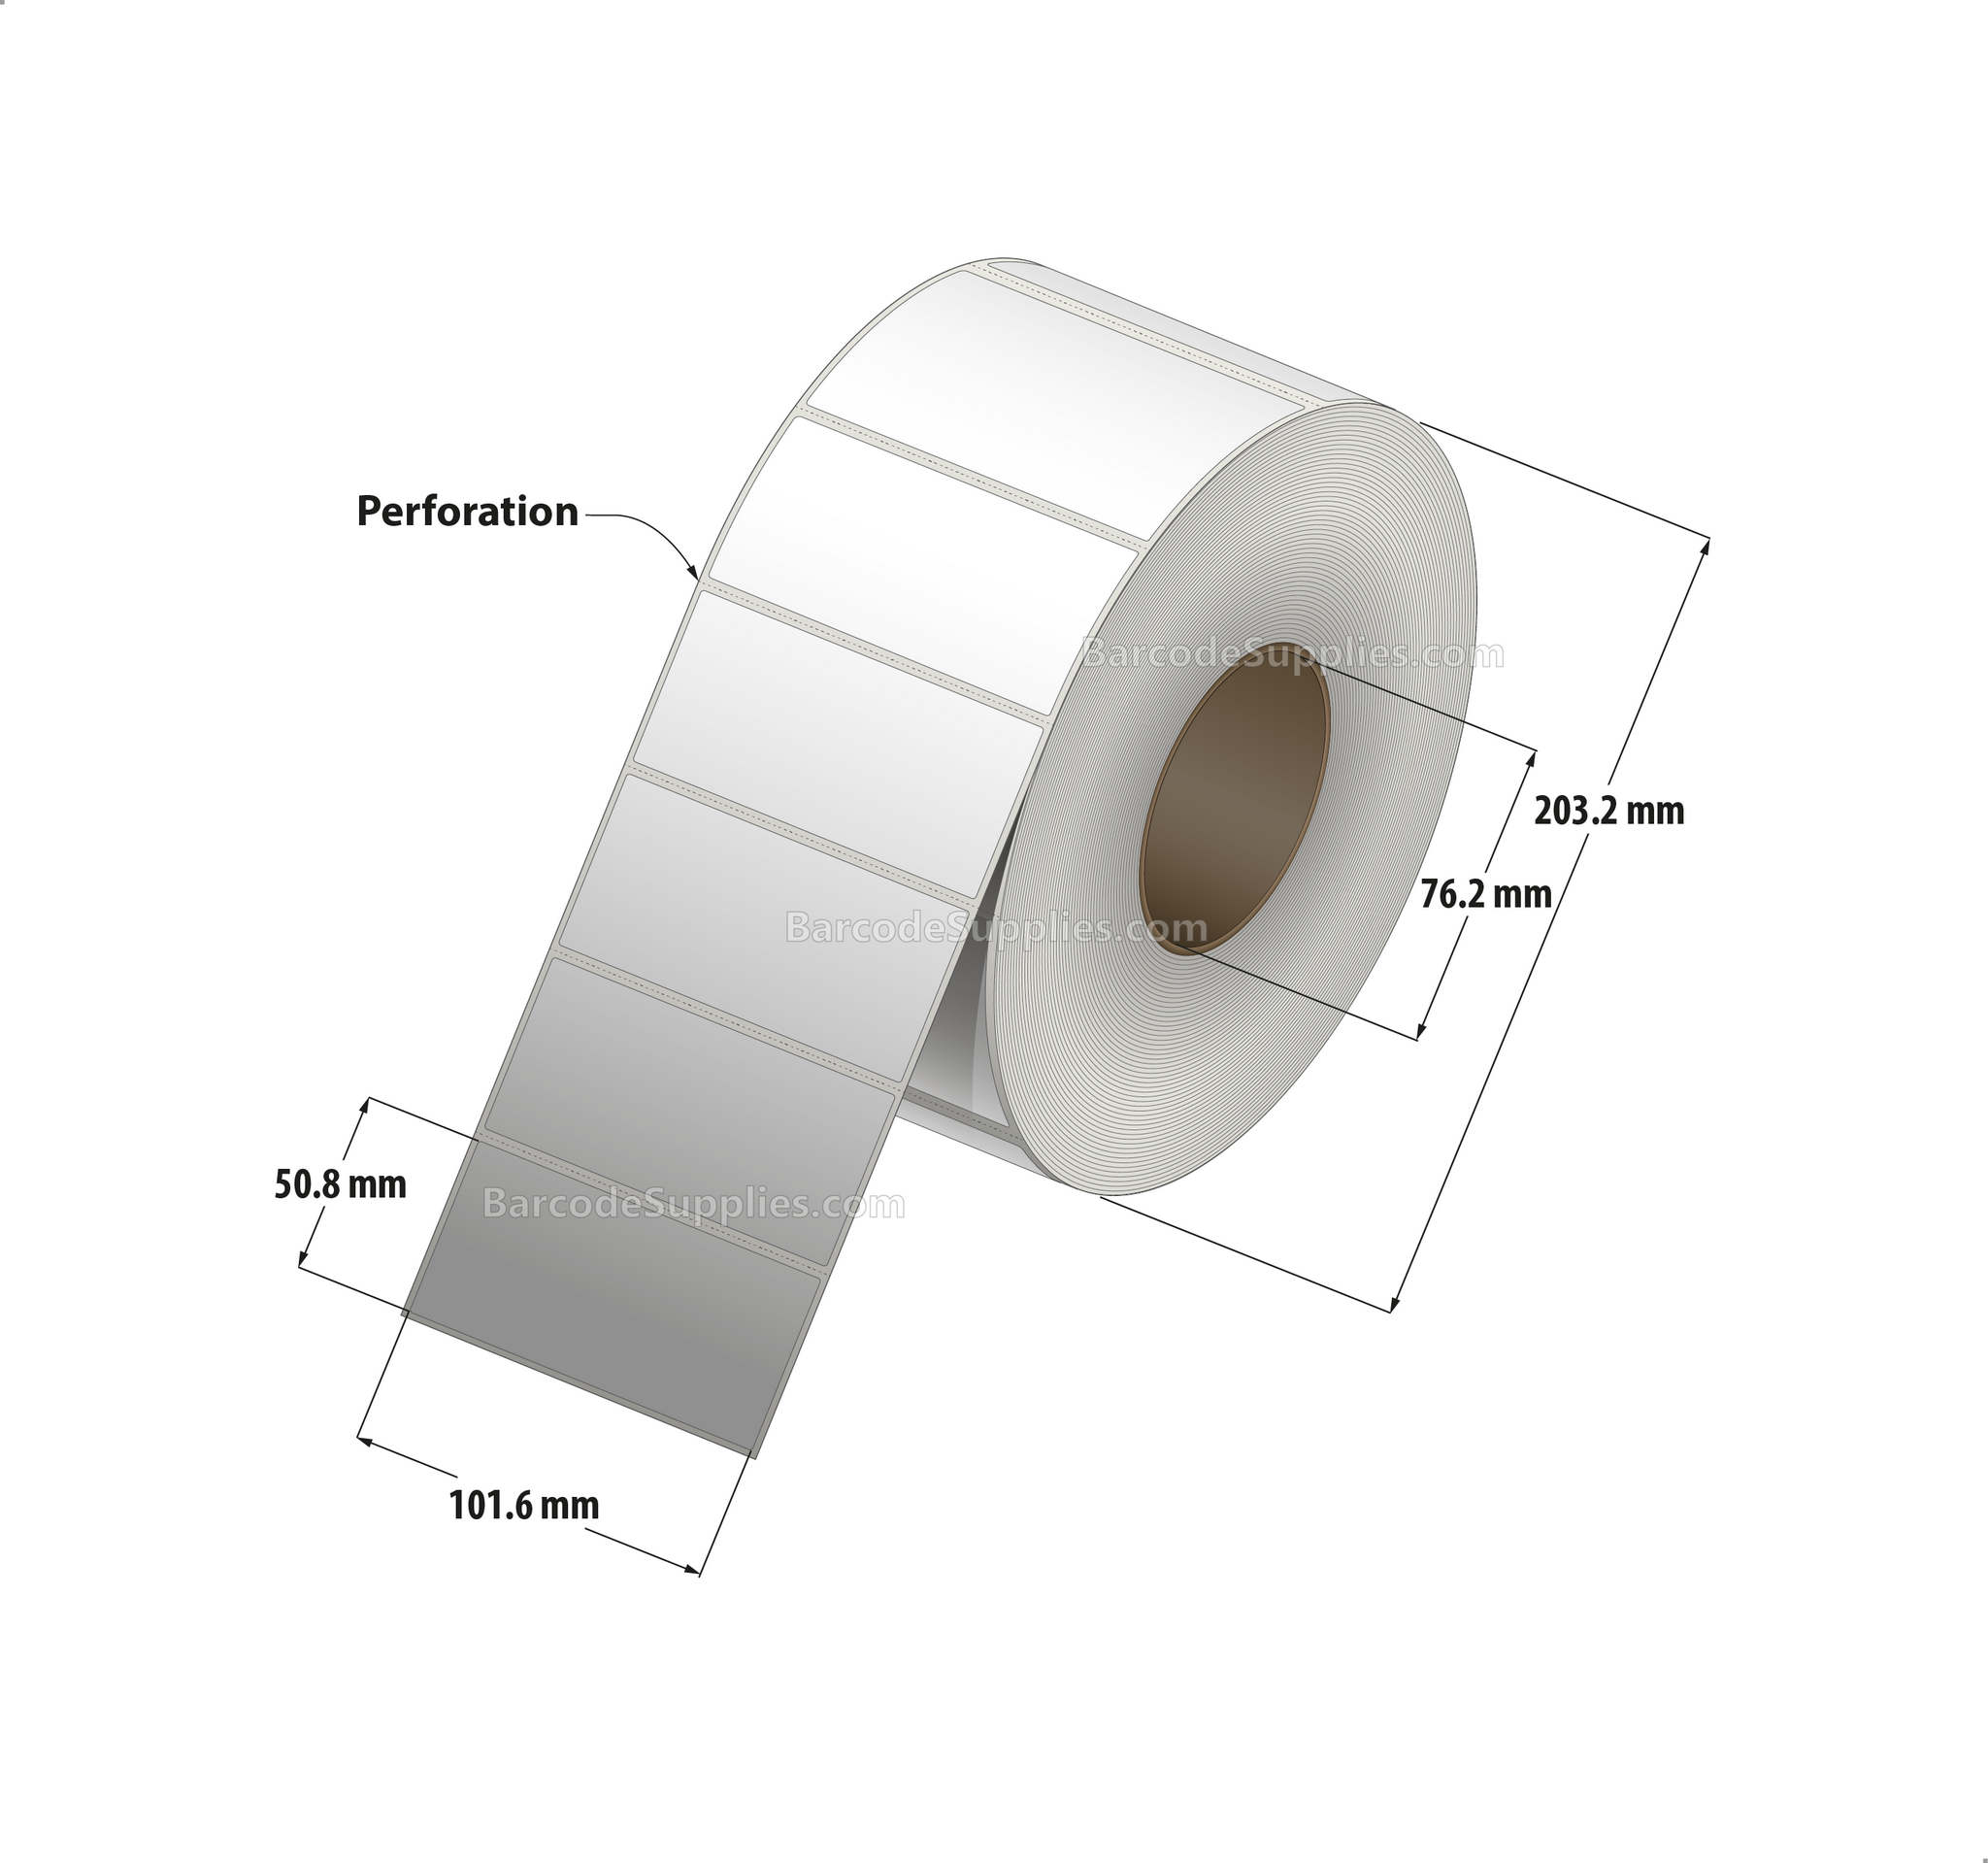 4 x 2 Thermal Transfer White Labels With Hammerlock (Very Aggressive) Adhesive - Perforated - 2900 Labels Per Roll - Carton Of 4 Rolls - 11600 Labels Total - MPN: RH-4-2-2900-3